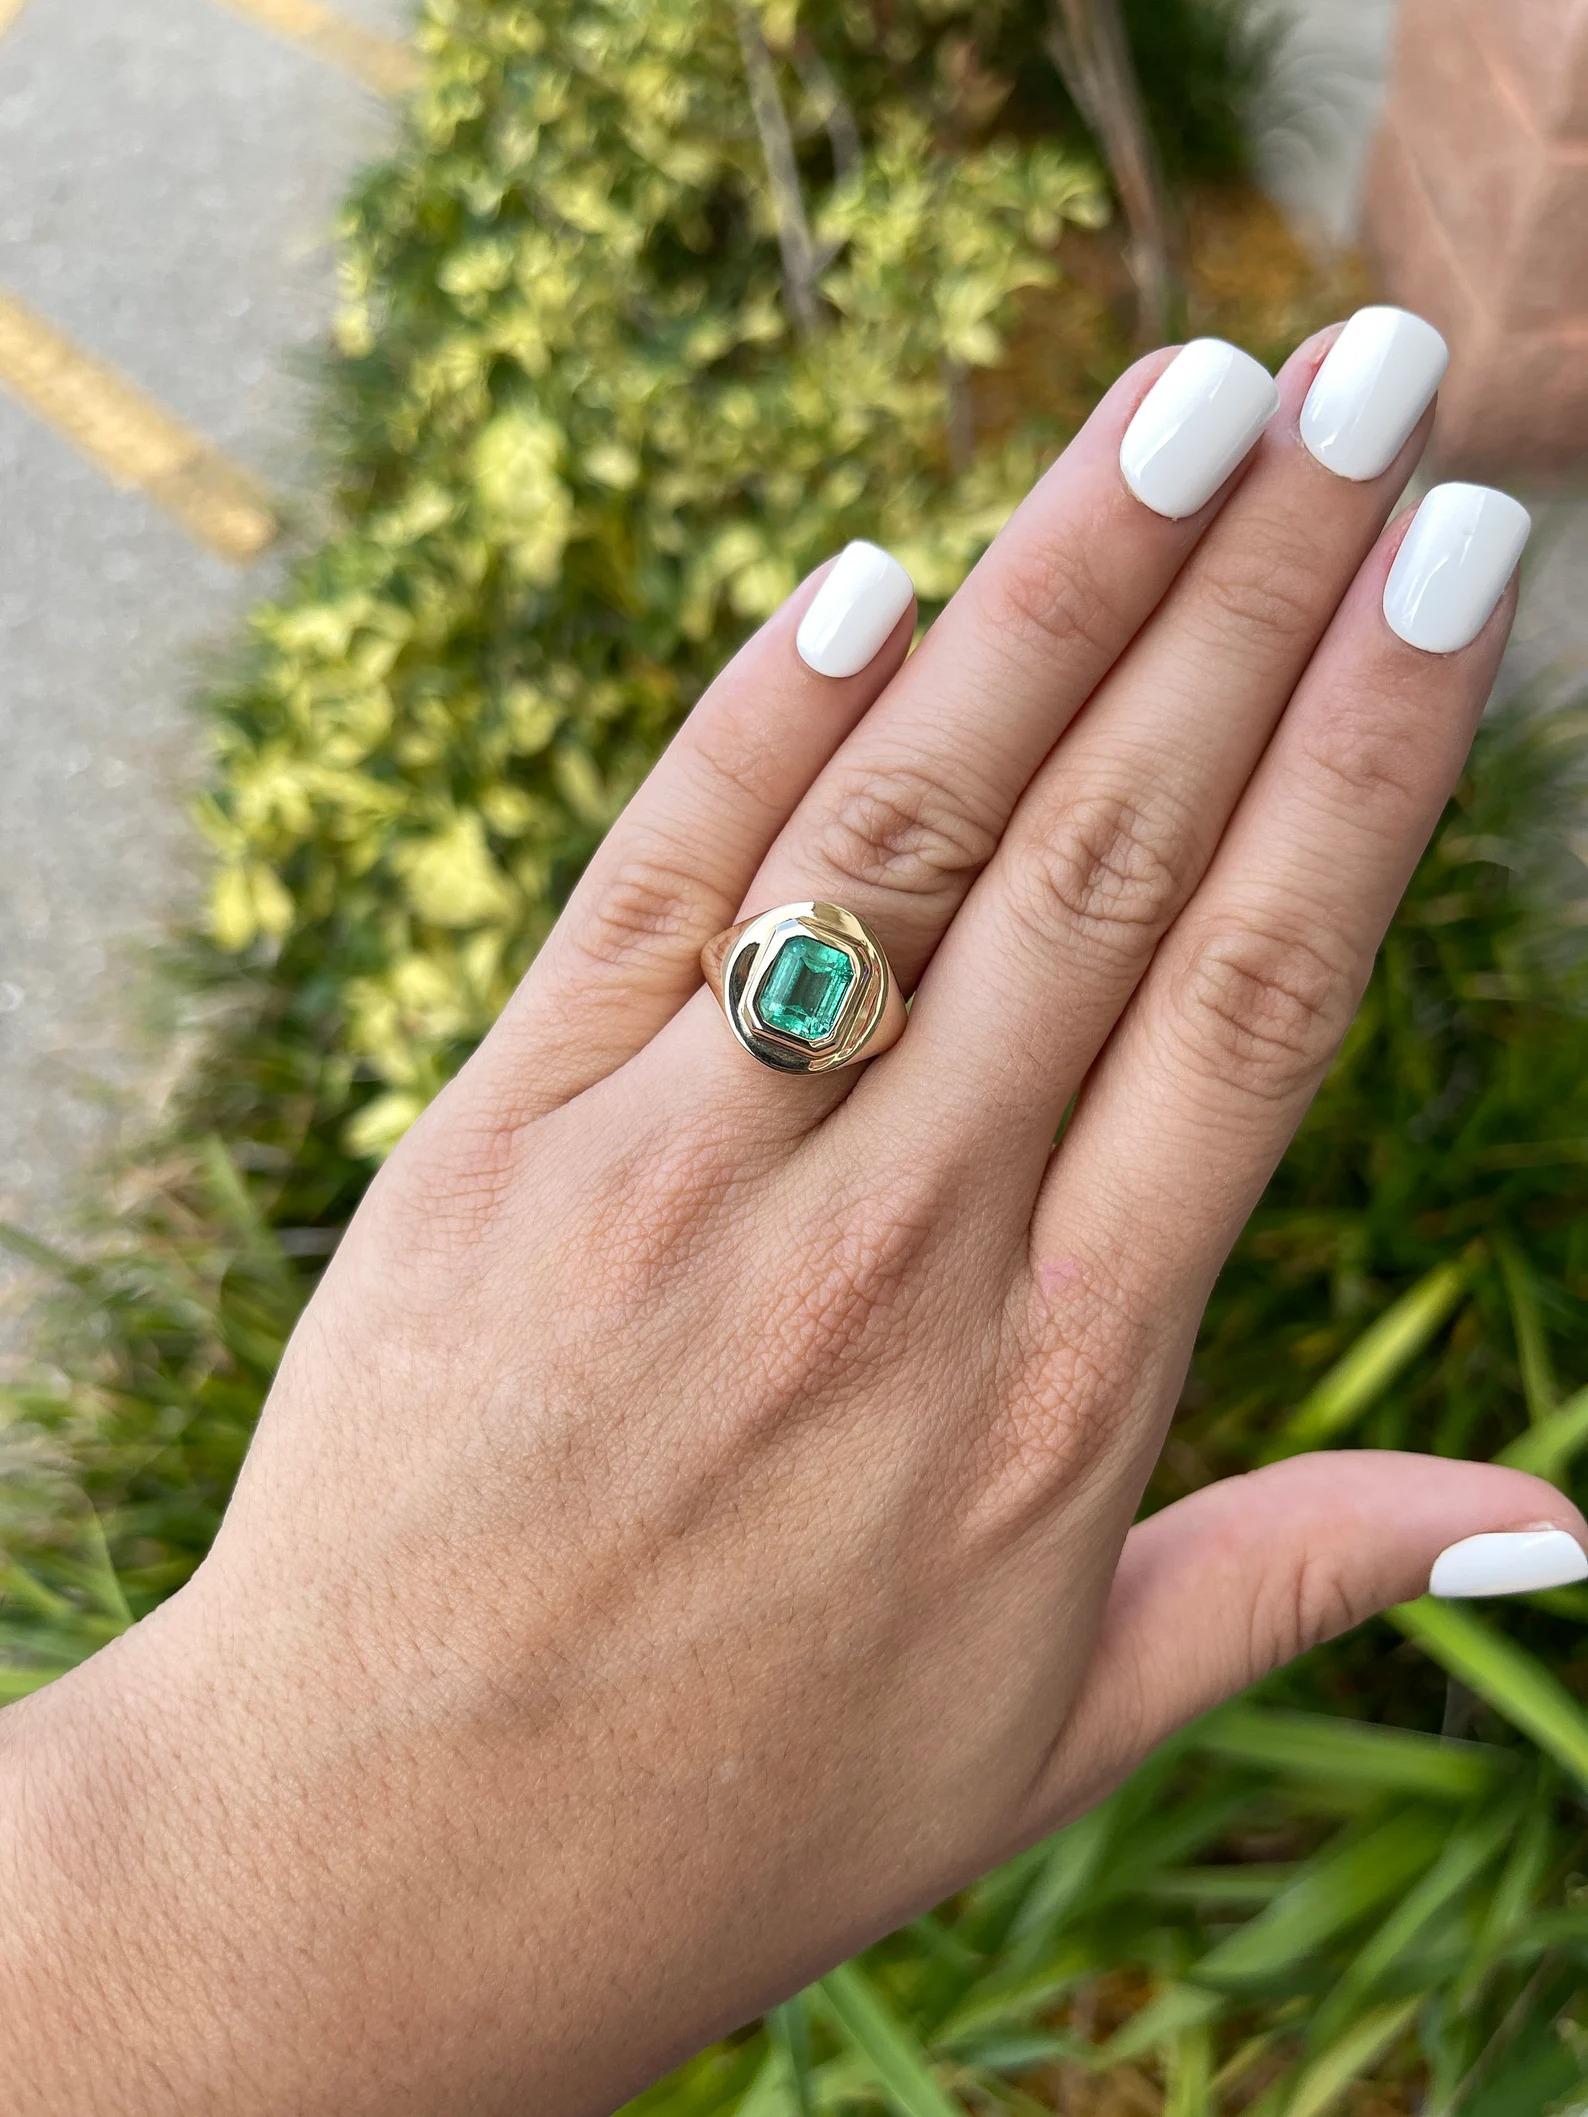 Take a look at this alluring emerald solitaire gold ring. The center gemstone holds 2.81-carats of pure natural Colombian emerald bliss. The gemstone showcases an enticing spring green color, with a faint bluish-green hue. Excellent luster and eye